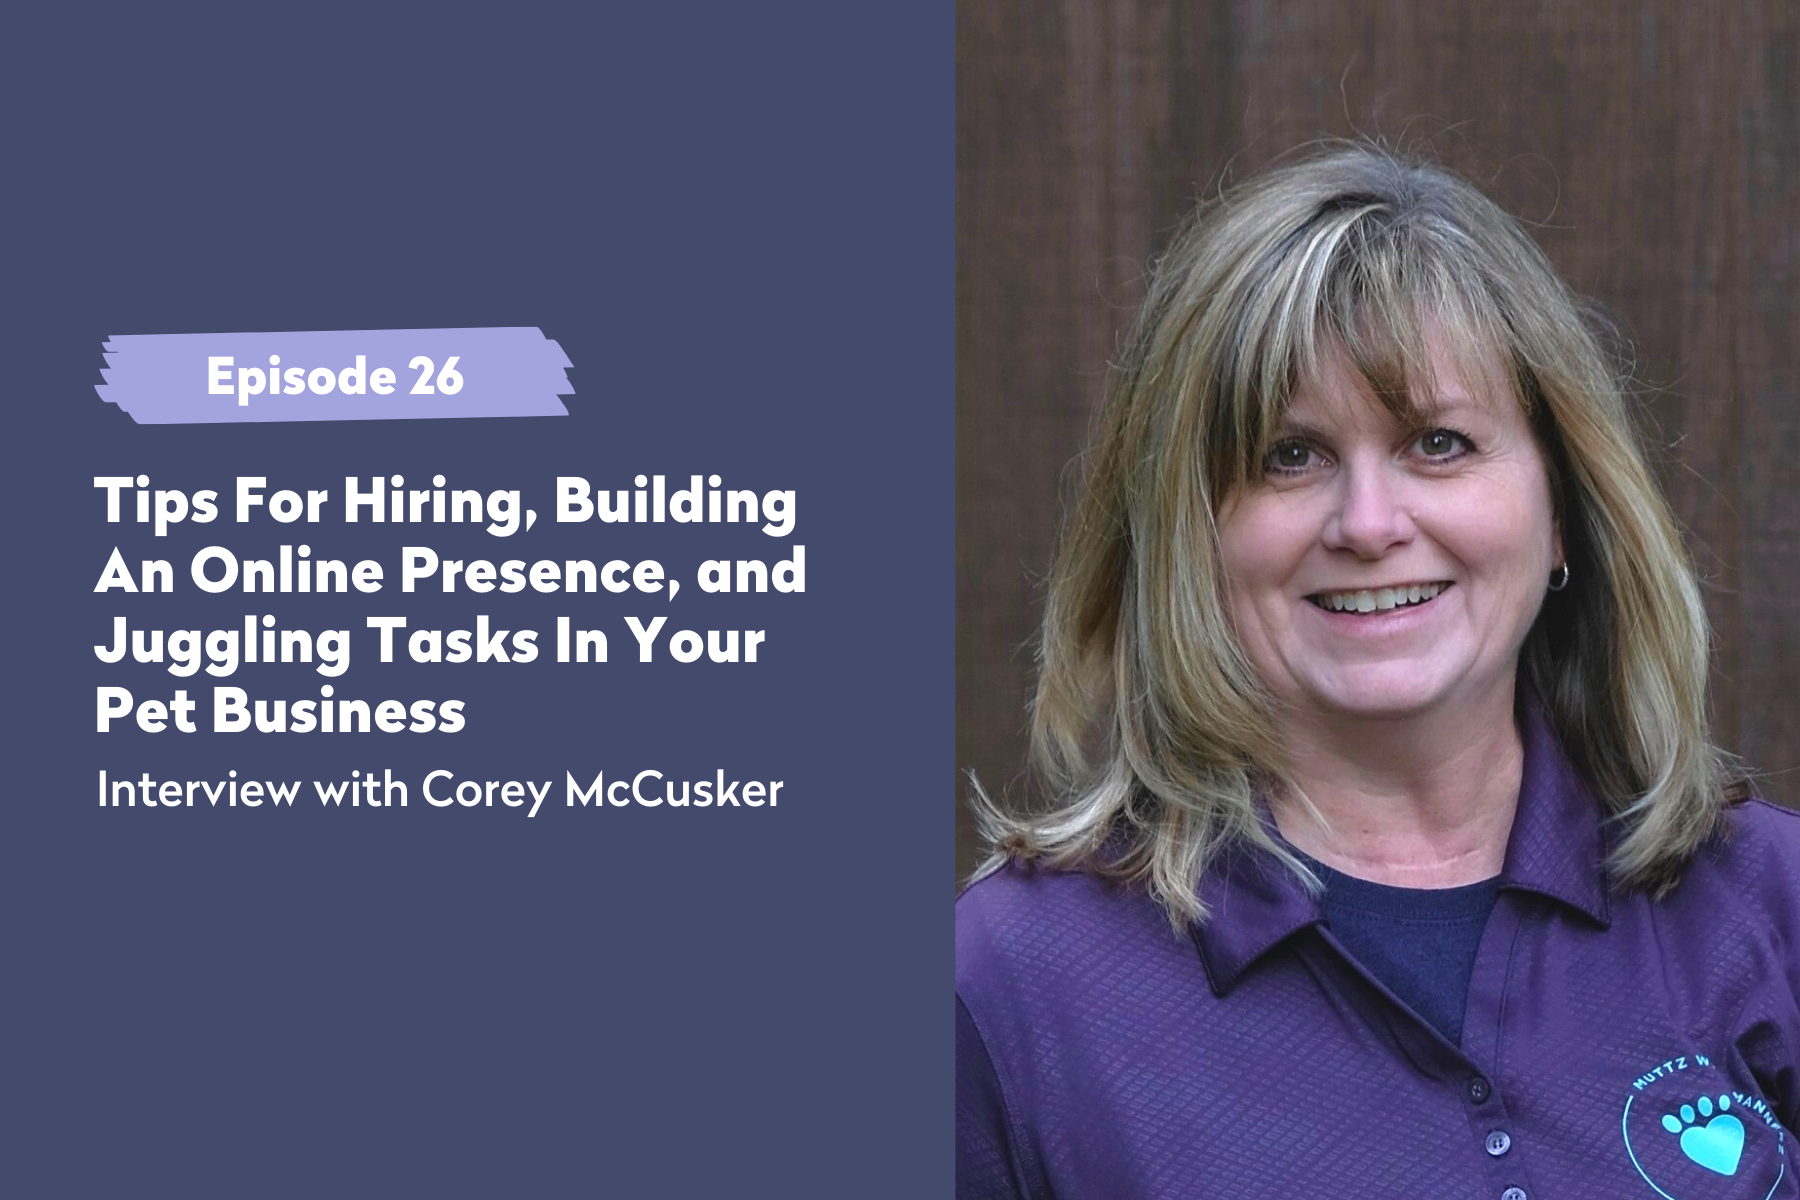 Episode 26 | Tips For Hiring, Building An Online Presence, and Juggling Tasks In Your Pet Business – An Interview with Corey McCusker